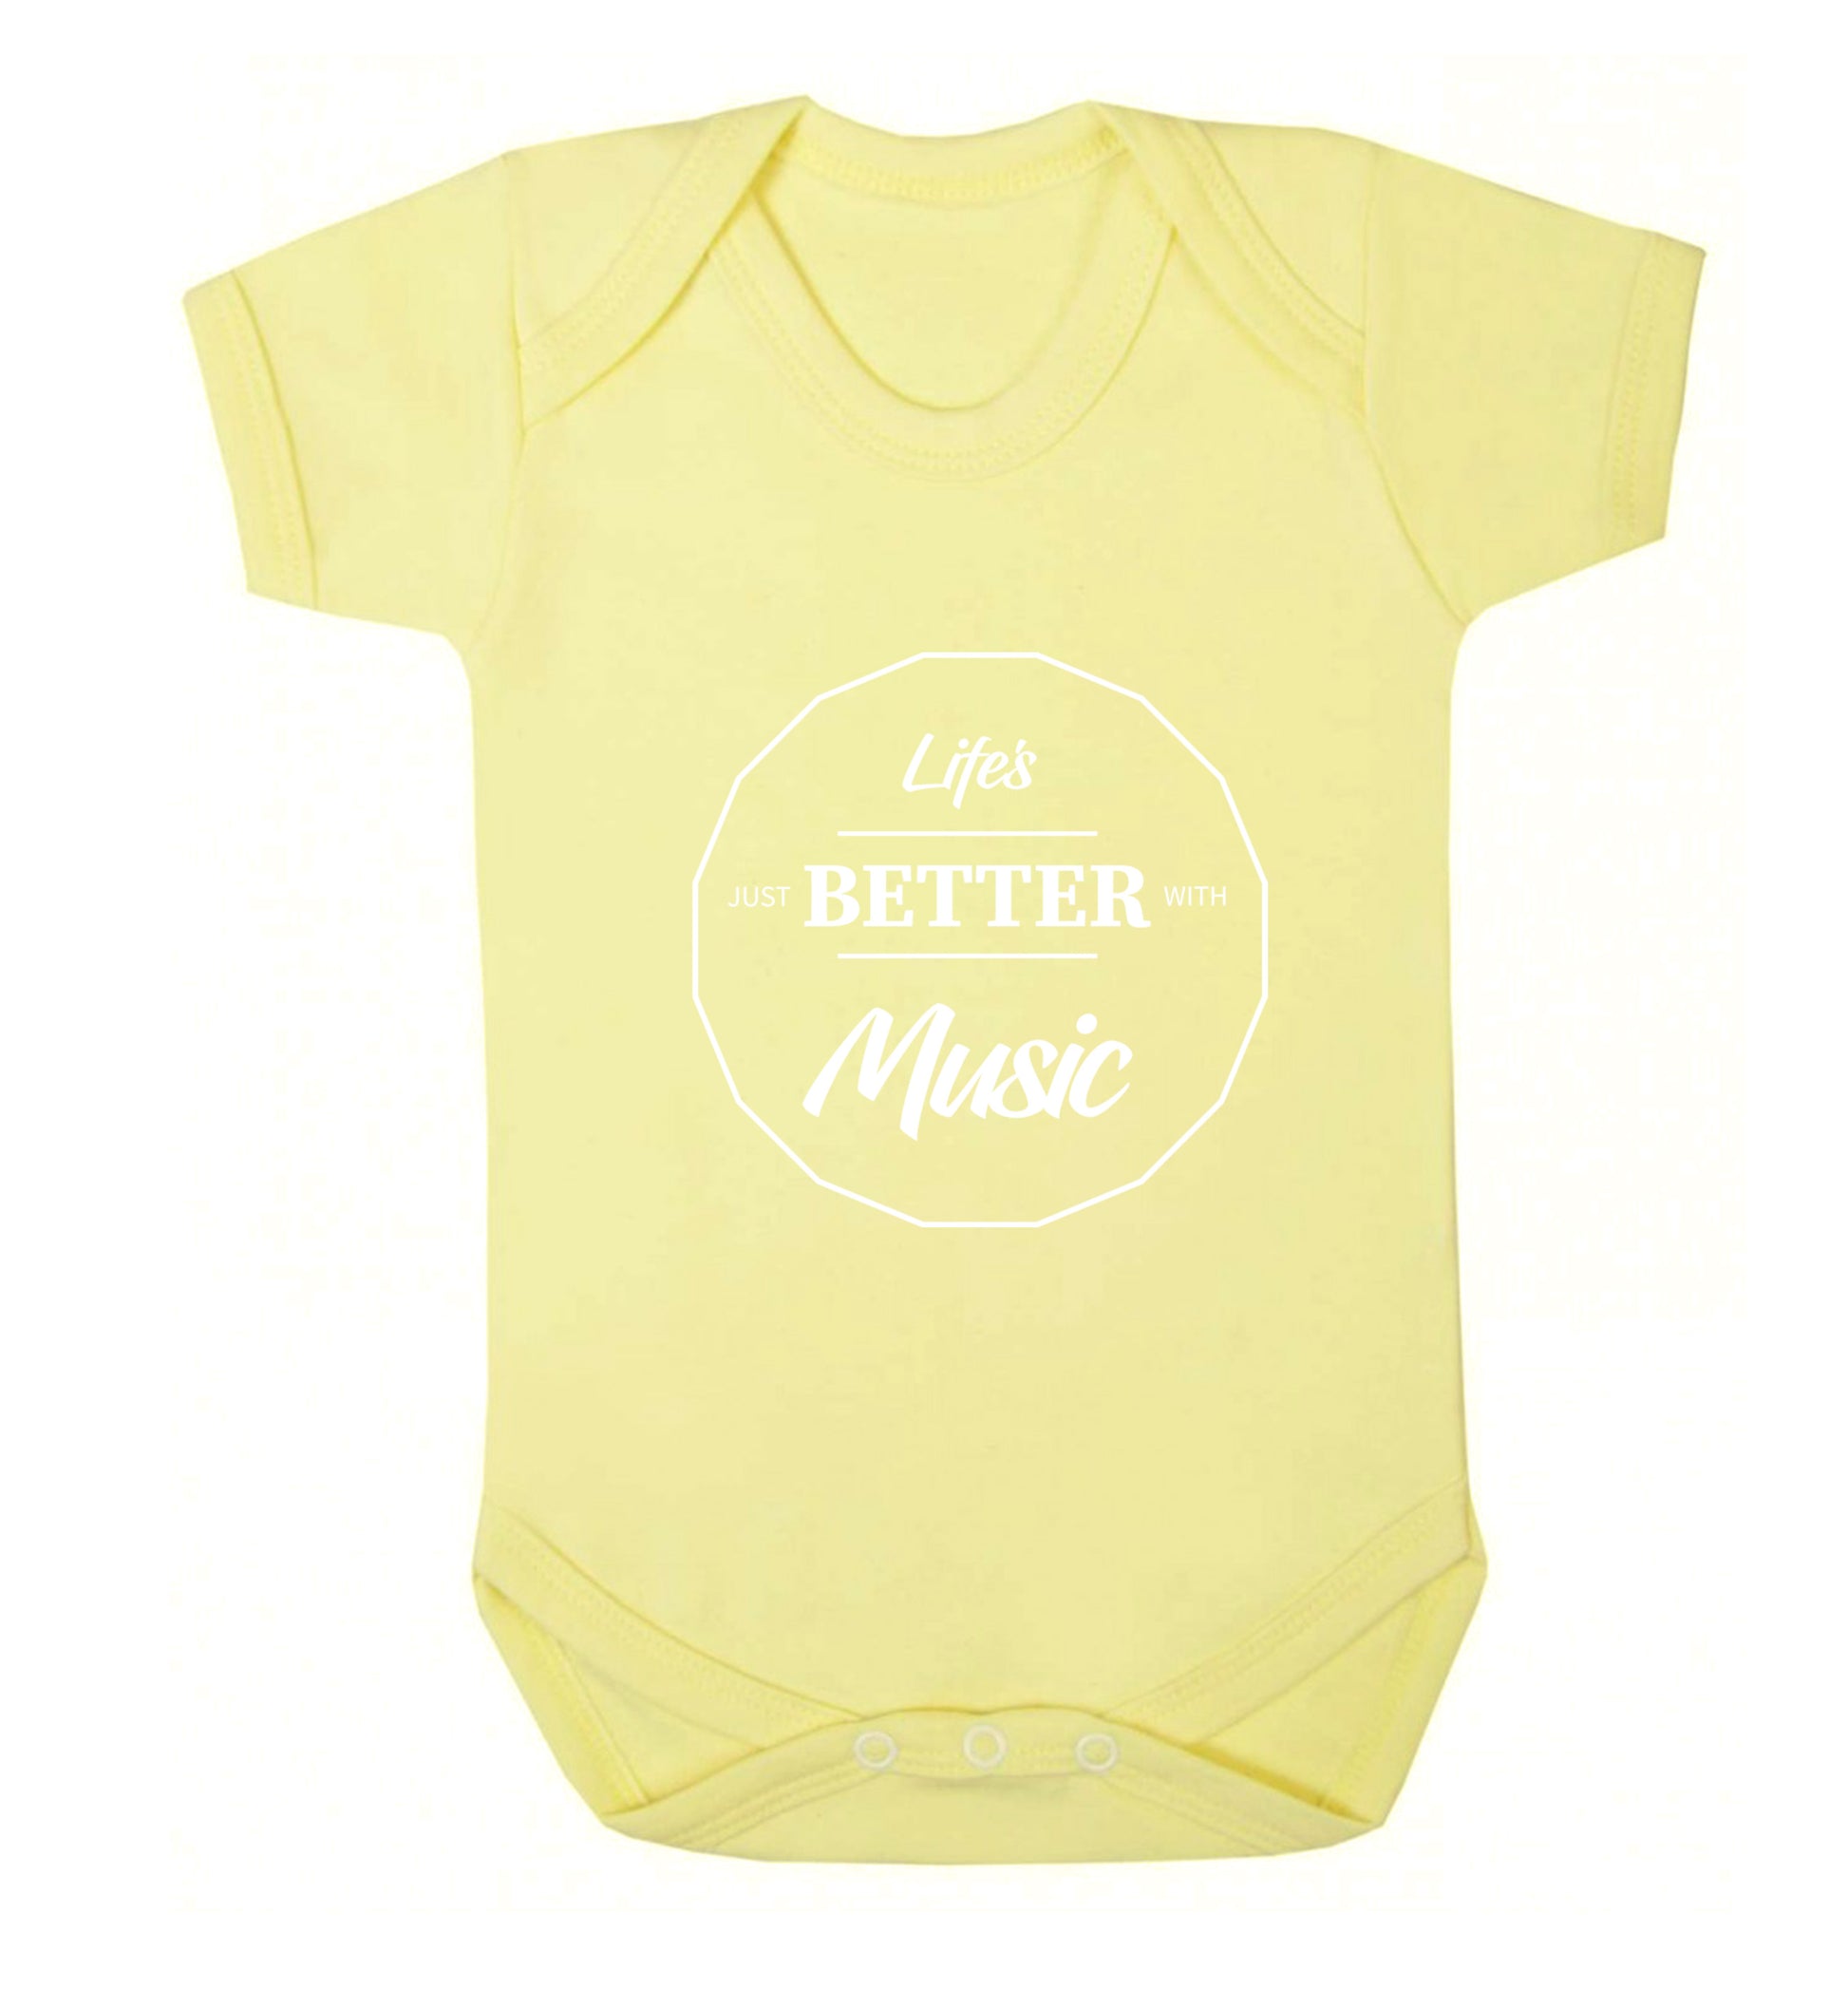 Life is Better With Music Baby Vest pale yellow 18-24 months